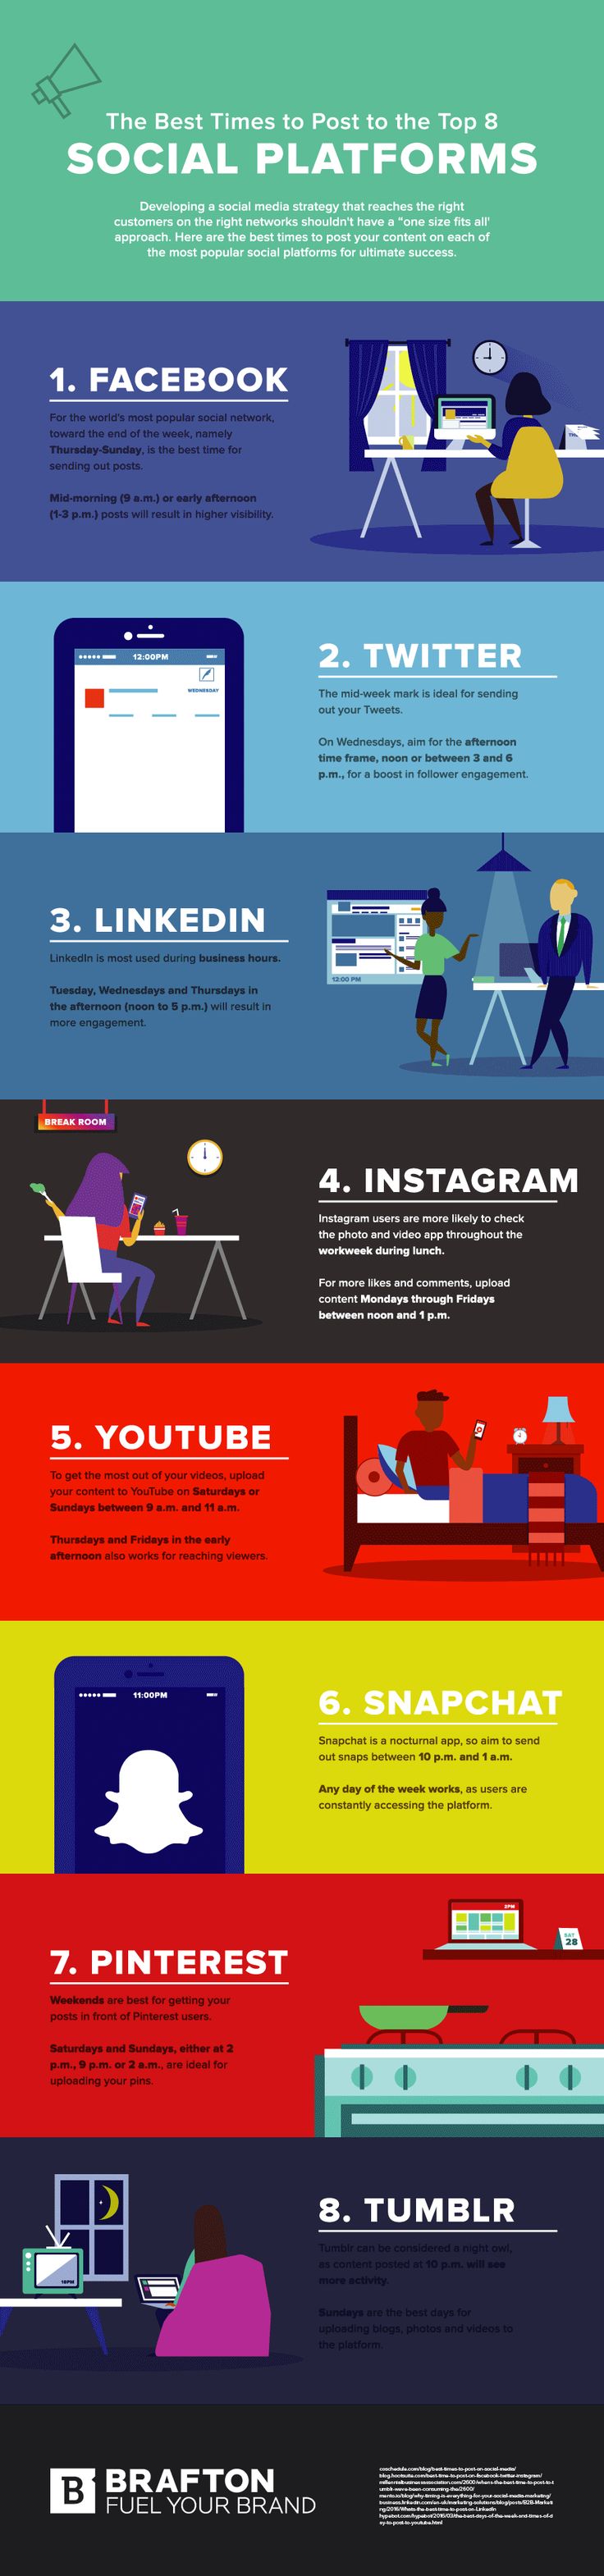 Advertising-Infographics-Science-Says-There’s-a-Right-Time-to-Post-to-Social-Media Advertising Infographics : Science Says There’s a Right Time to Post to Social Media